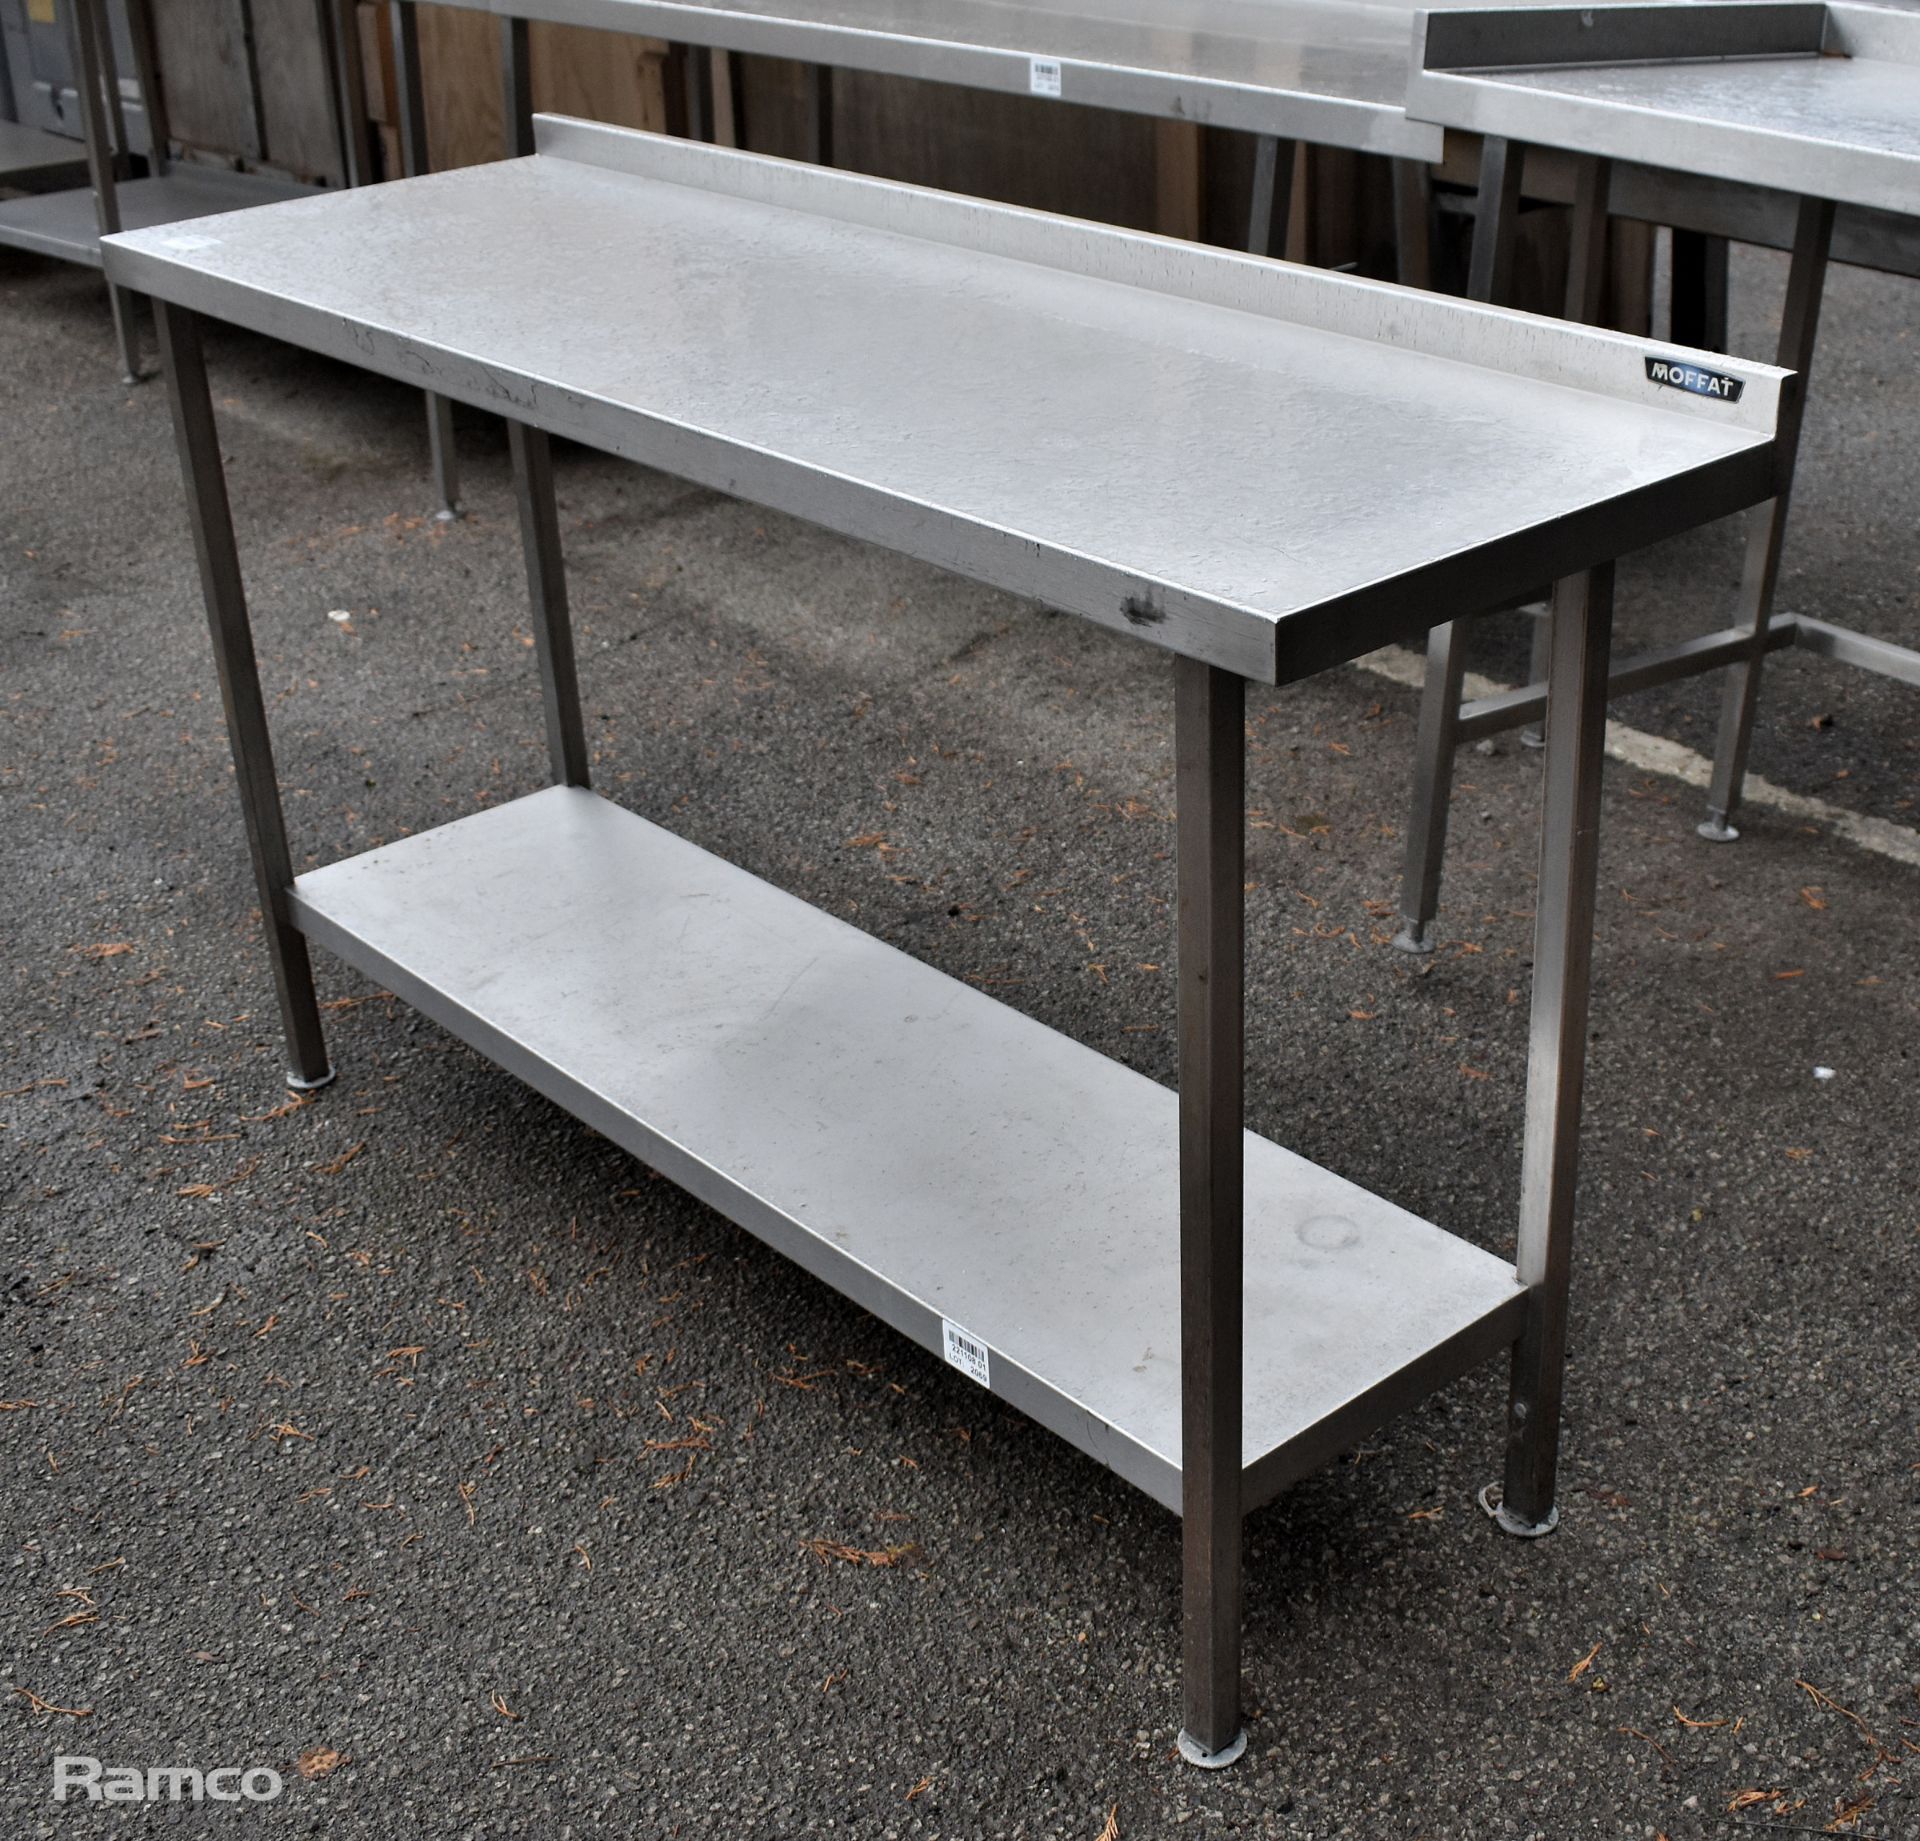 Moffat stainless steel table with undershelf - 150x50x94cm - Image 4 of 4